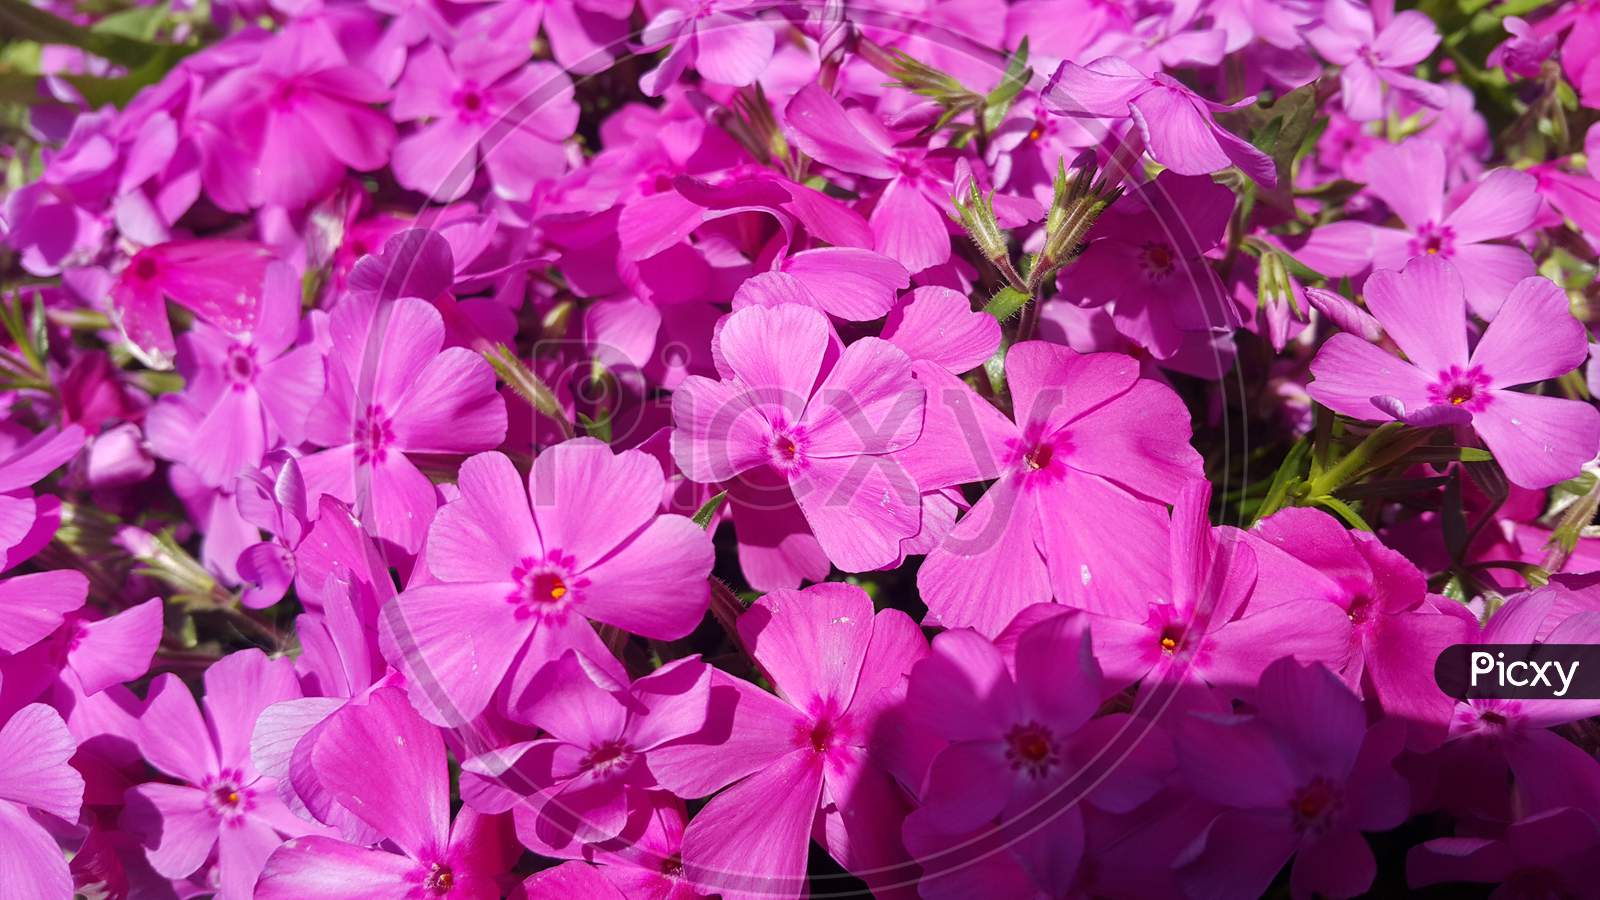 Close Up View Of Several Pink Flowers Under Sunlight With Pink Petals